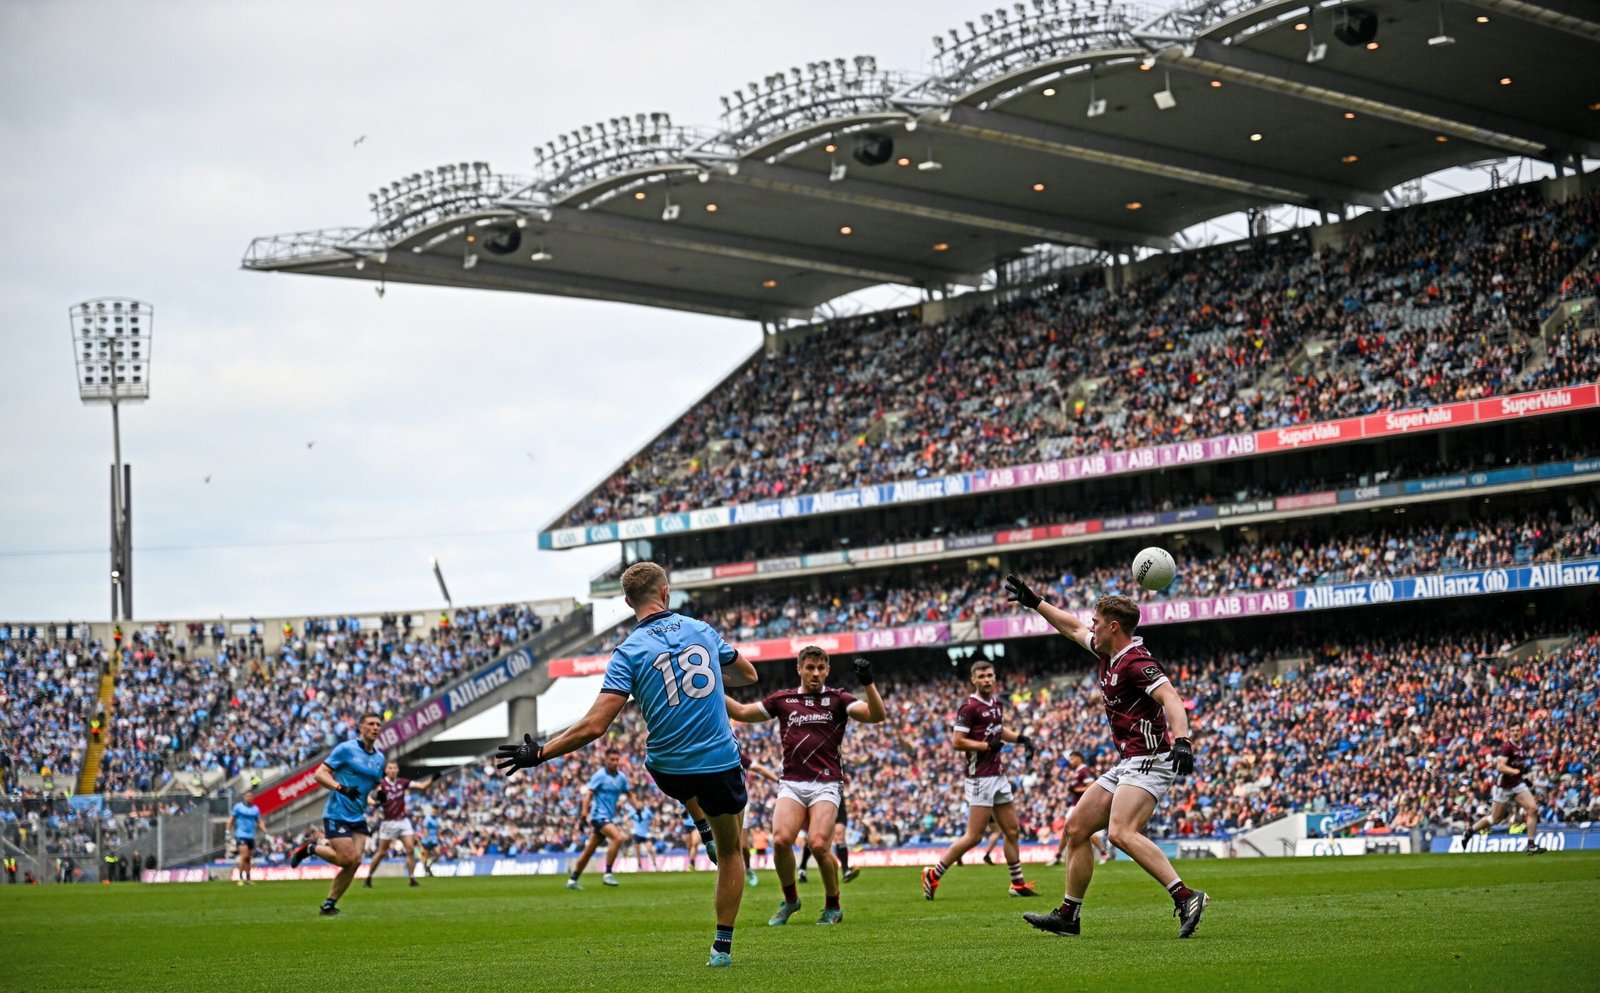 Galway Boots Dublin Out Of All-Irelands With Historic Upset